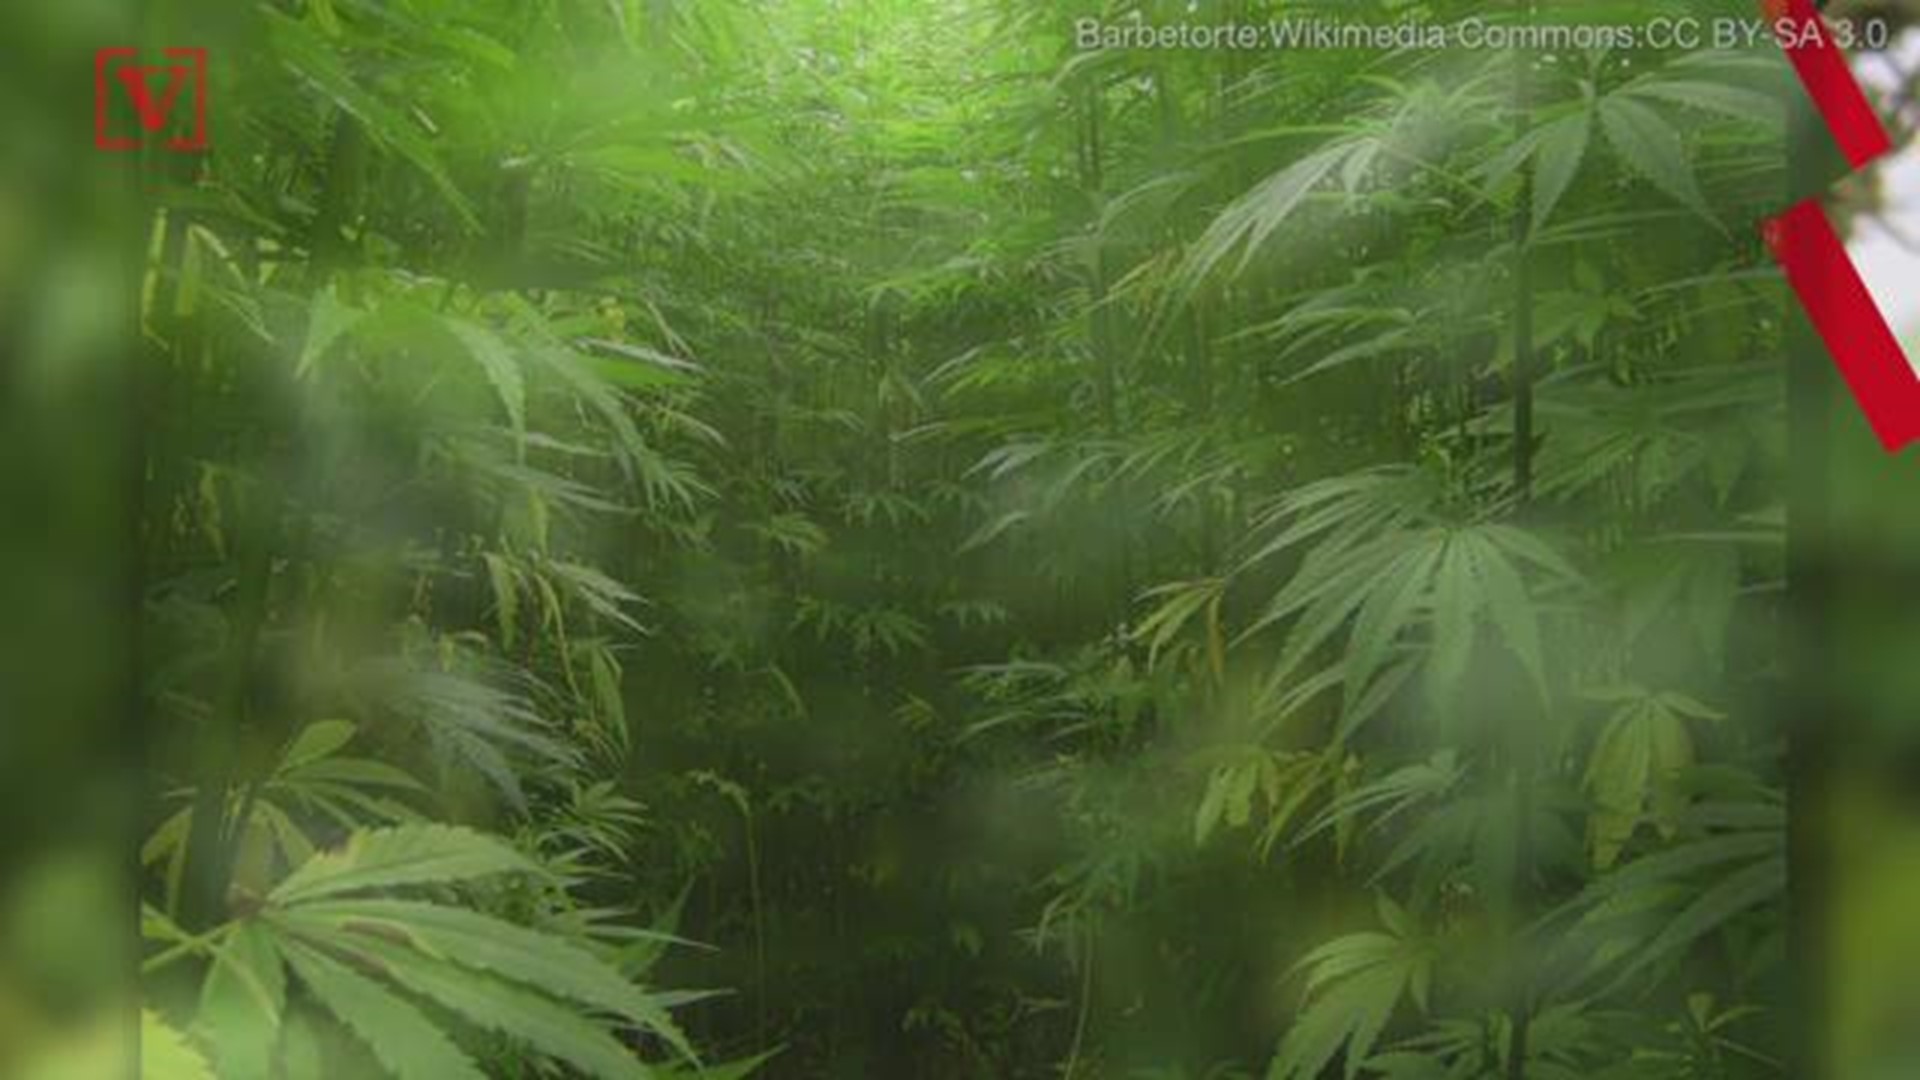 Senate Majority Leader Mitch McConnell and Senator Ron Wyden of Oregon are working to get hemp removed from a federal list of illegal controlled substances.